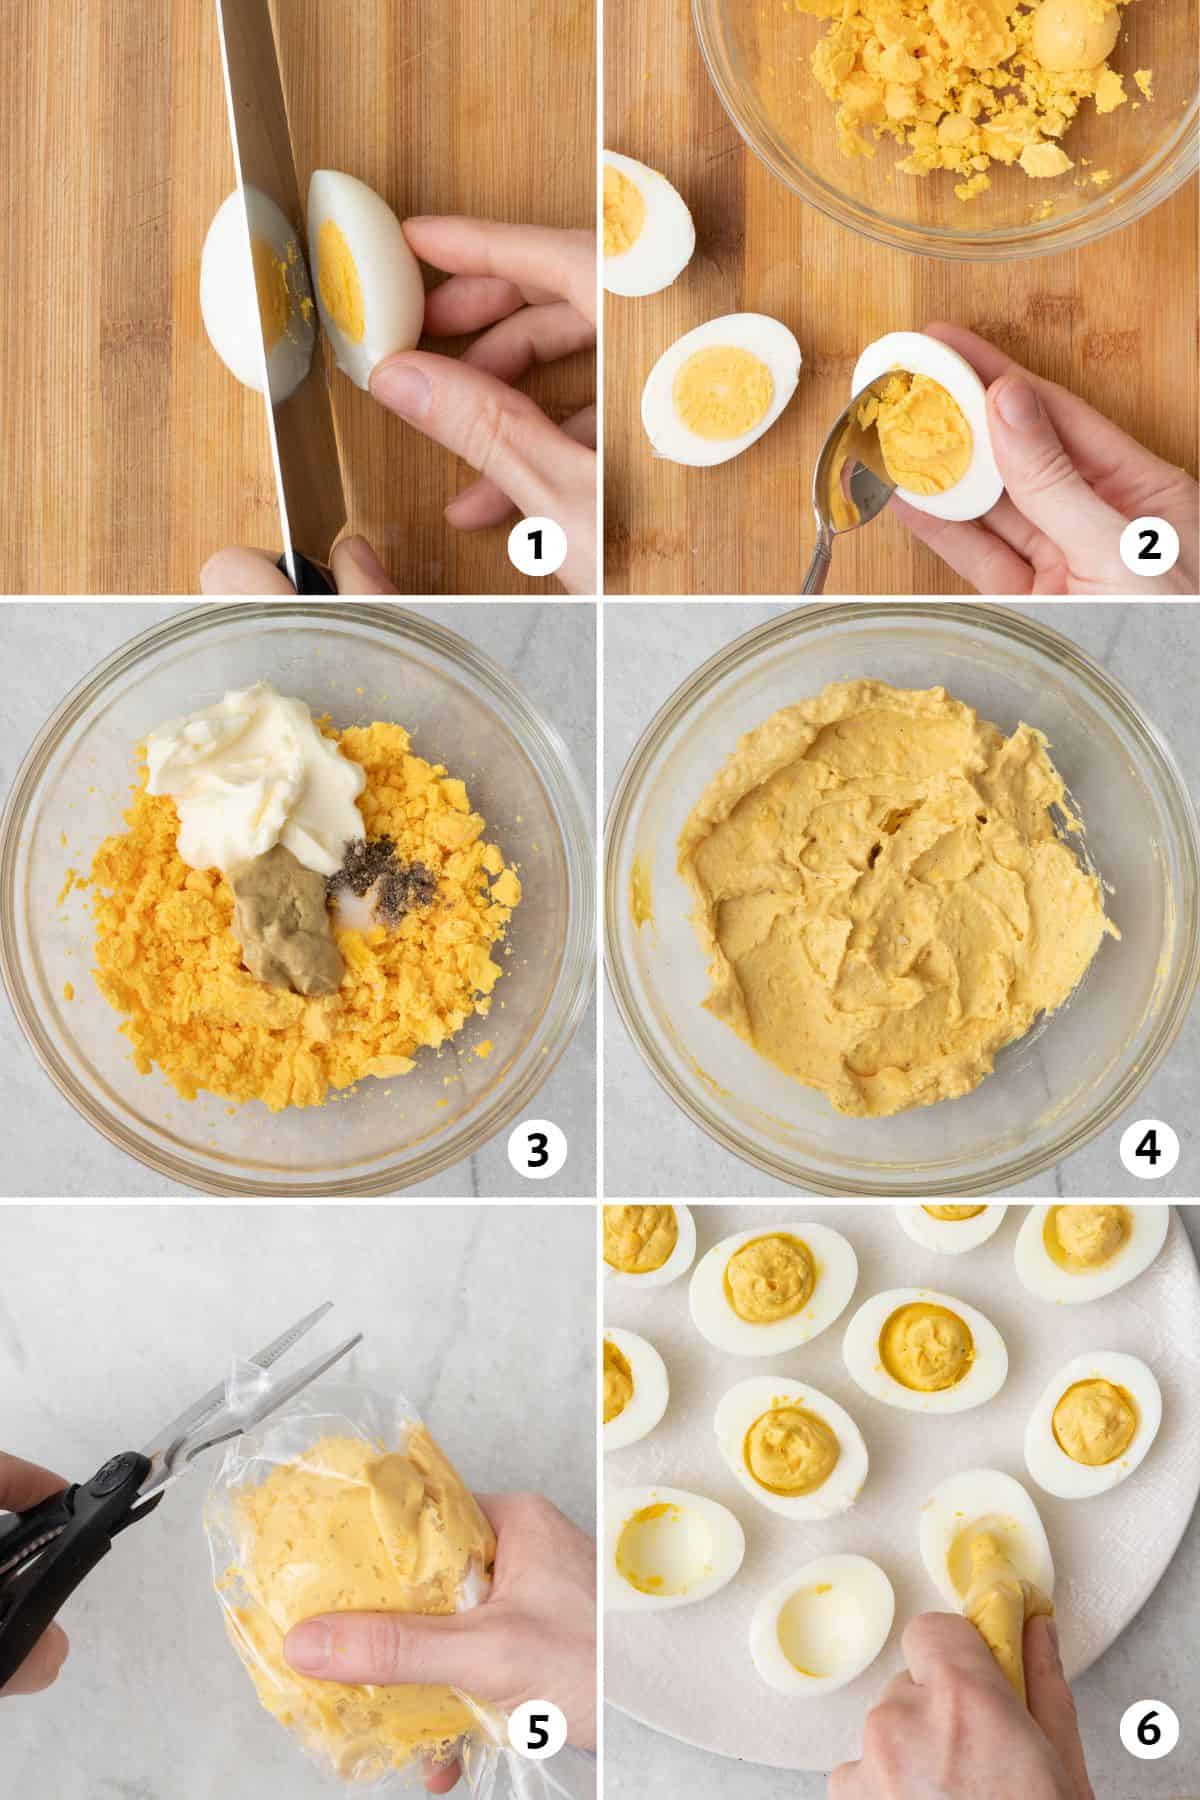 6 image collage with steps to make recipe: 1- slice boiled eggs in half, 2- scoop the yolks into a bowl, 3- add remaining ingredients to bowl, 4- yolk mixture combined, 5- yolk mixture transferred to a bag with scissors snipping of the tip, 6- yolk mixture being squeezed into egg white shells.